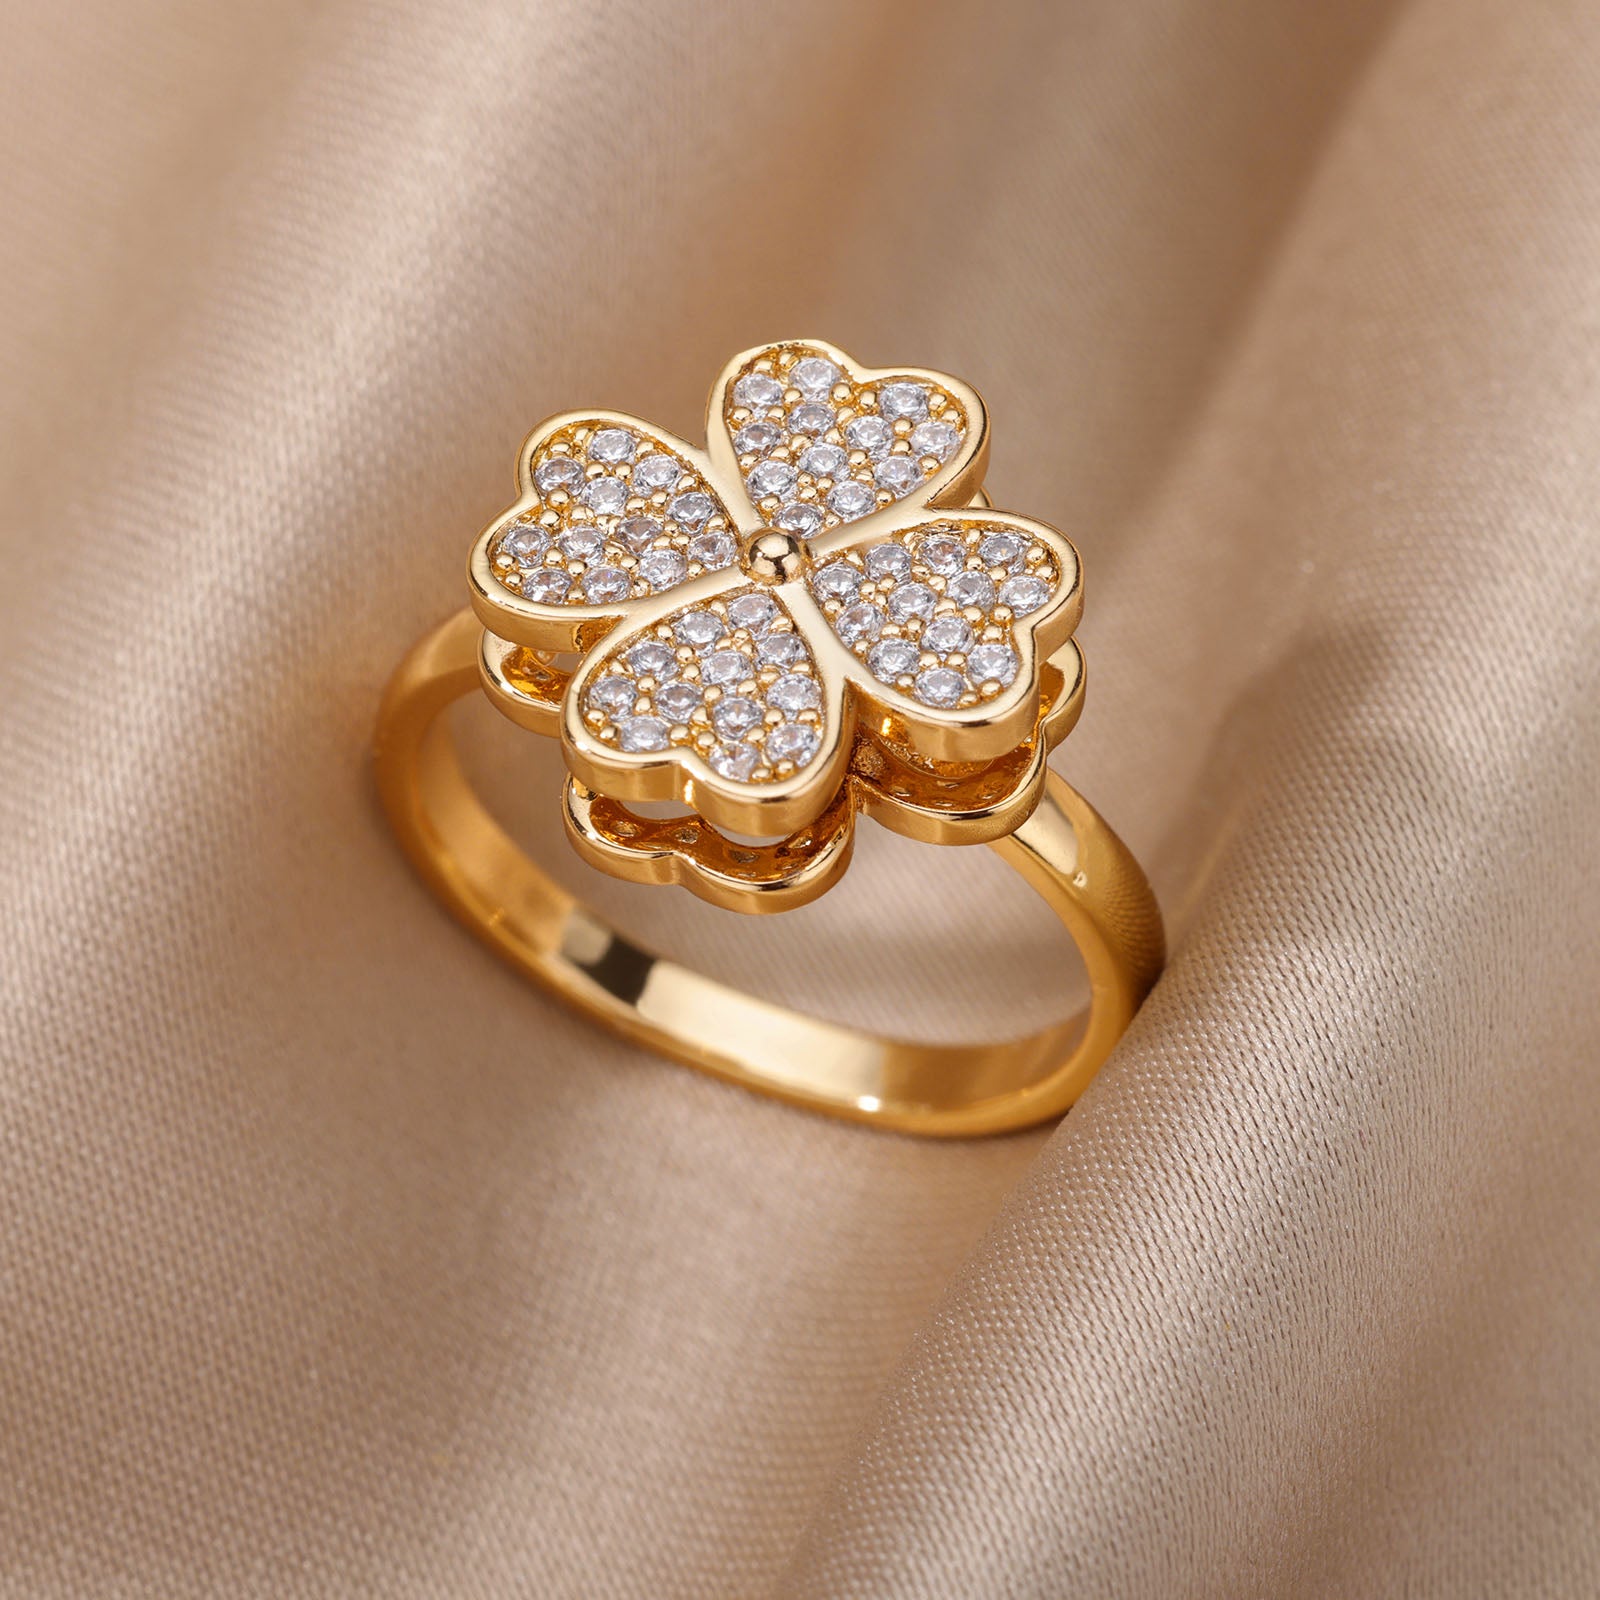 Four Leaf Clover Anxiety Ring